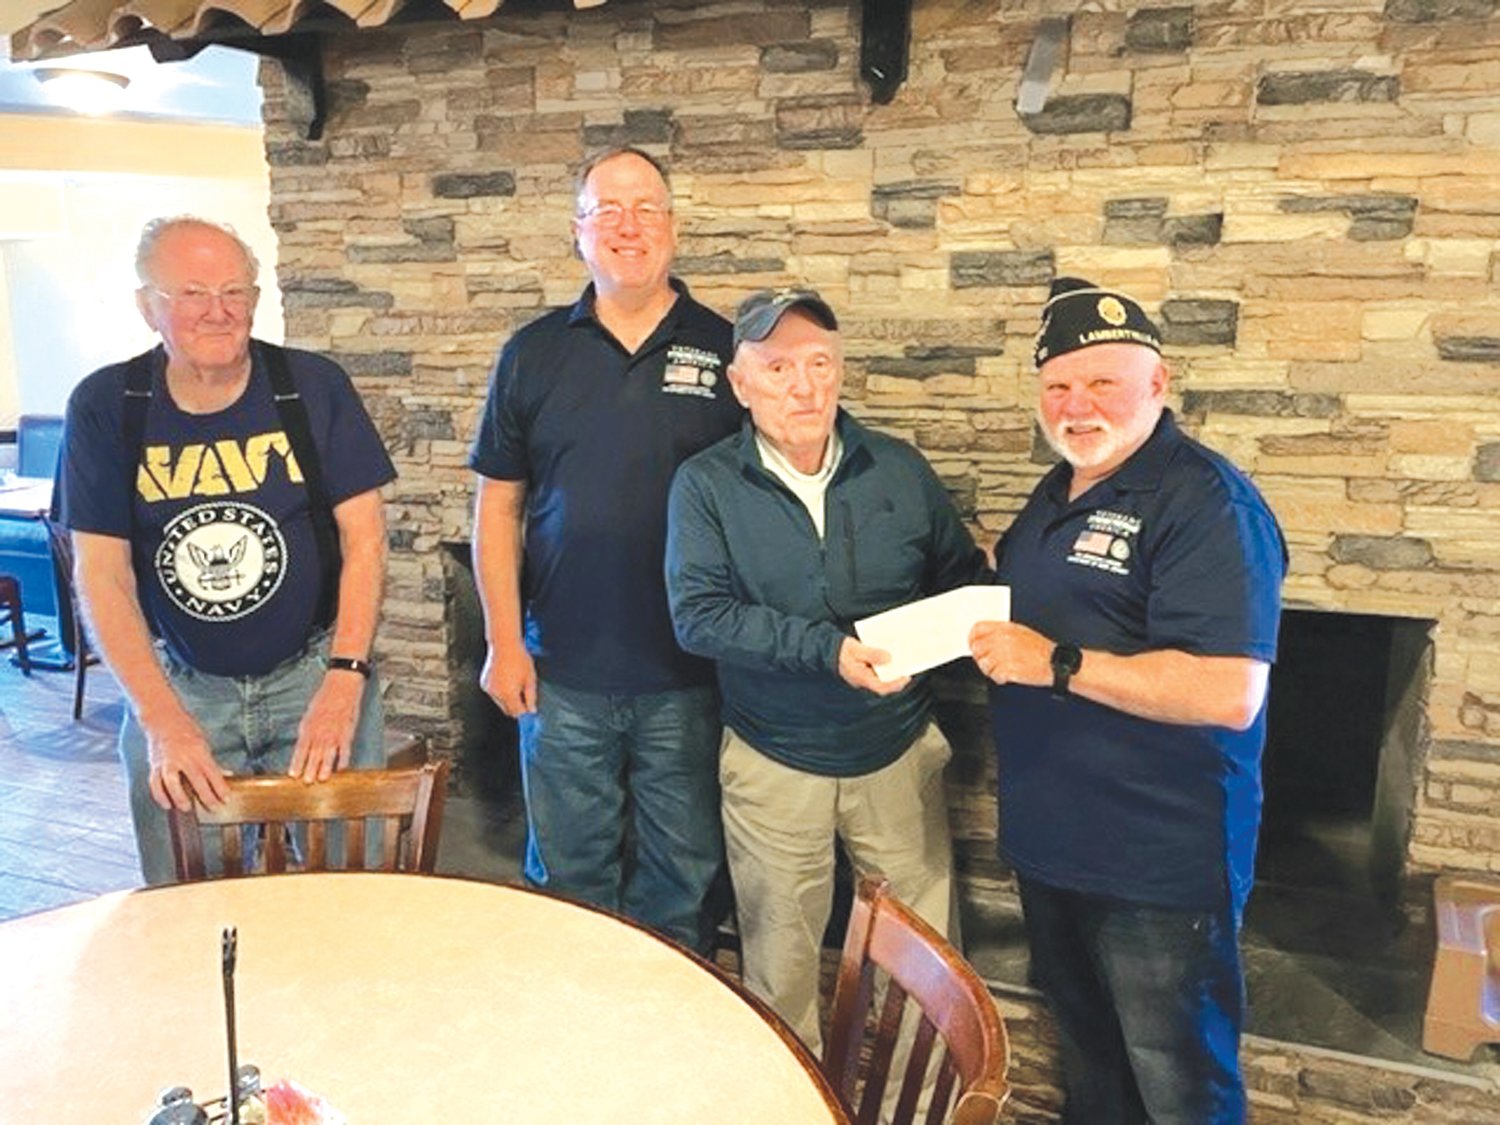 Bill Corboy, president of the Lambertville-New Hope Kiwanis Club, presents the club’s donation to Norb Russo, right, commander, American Legion Post 120.